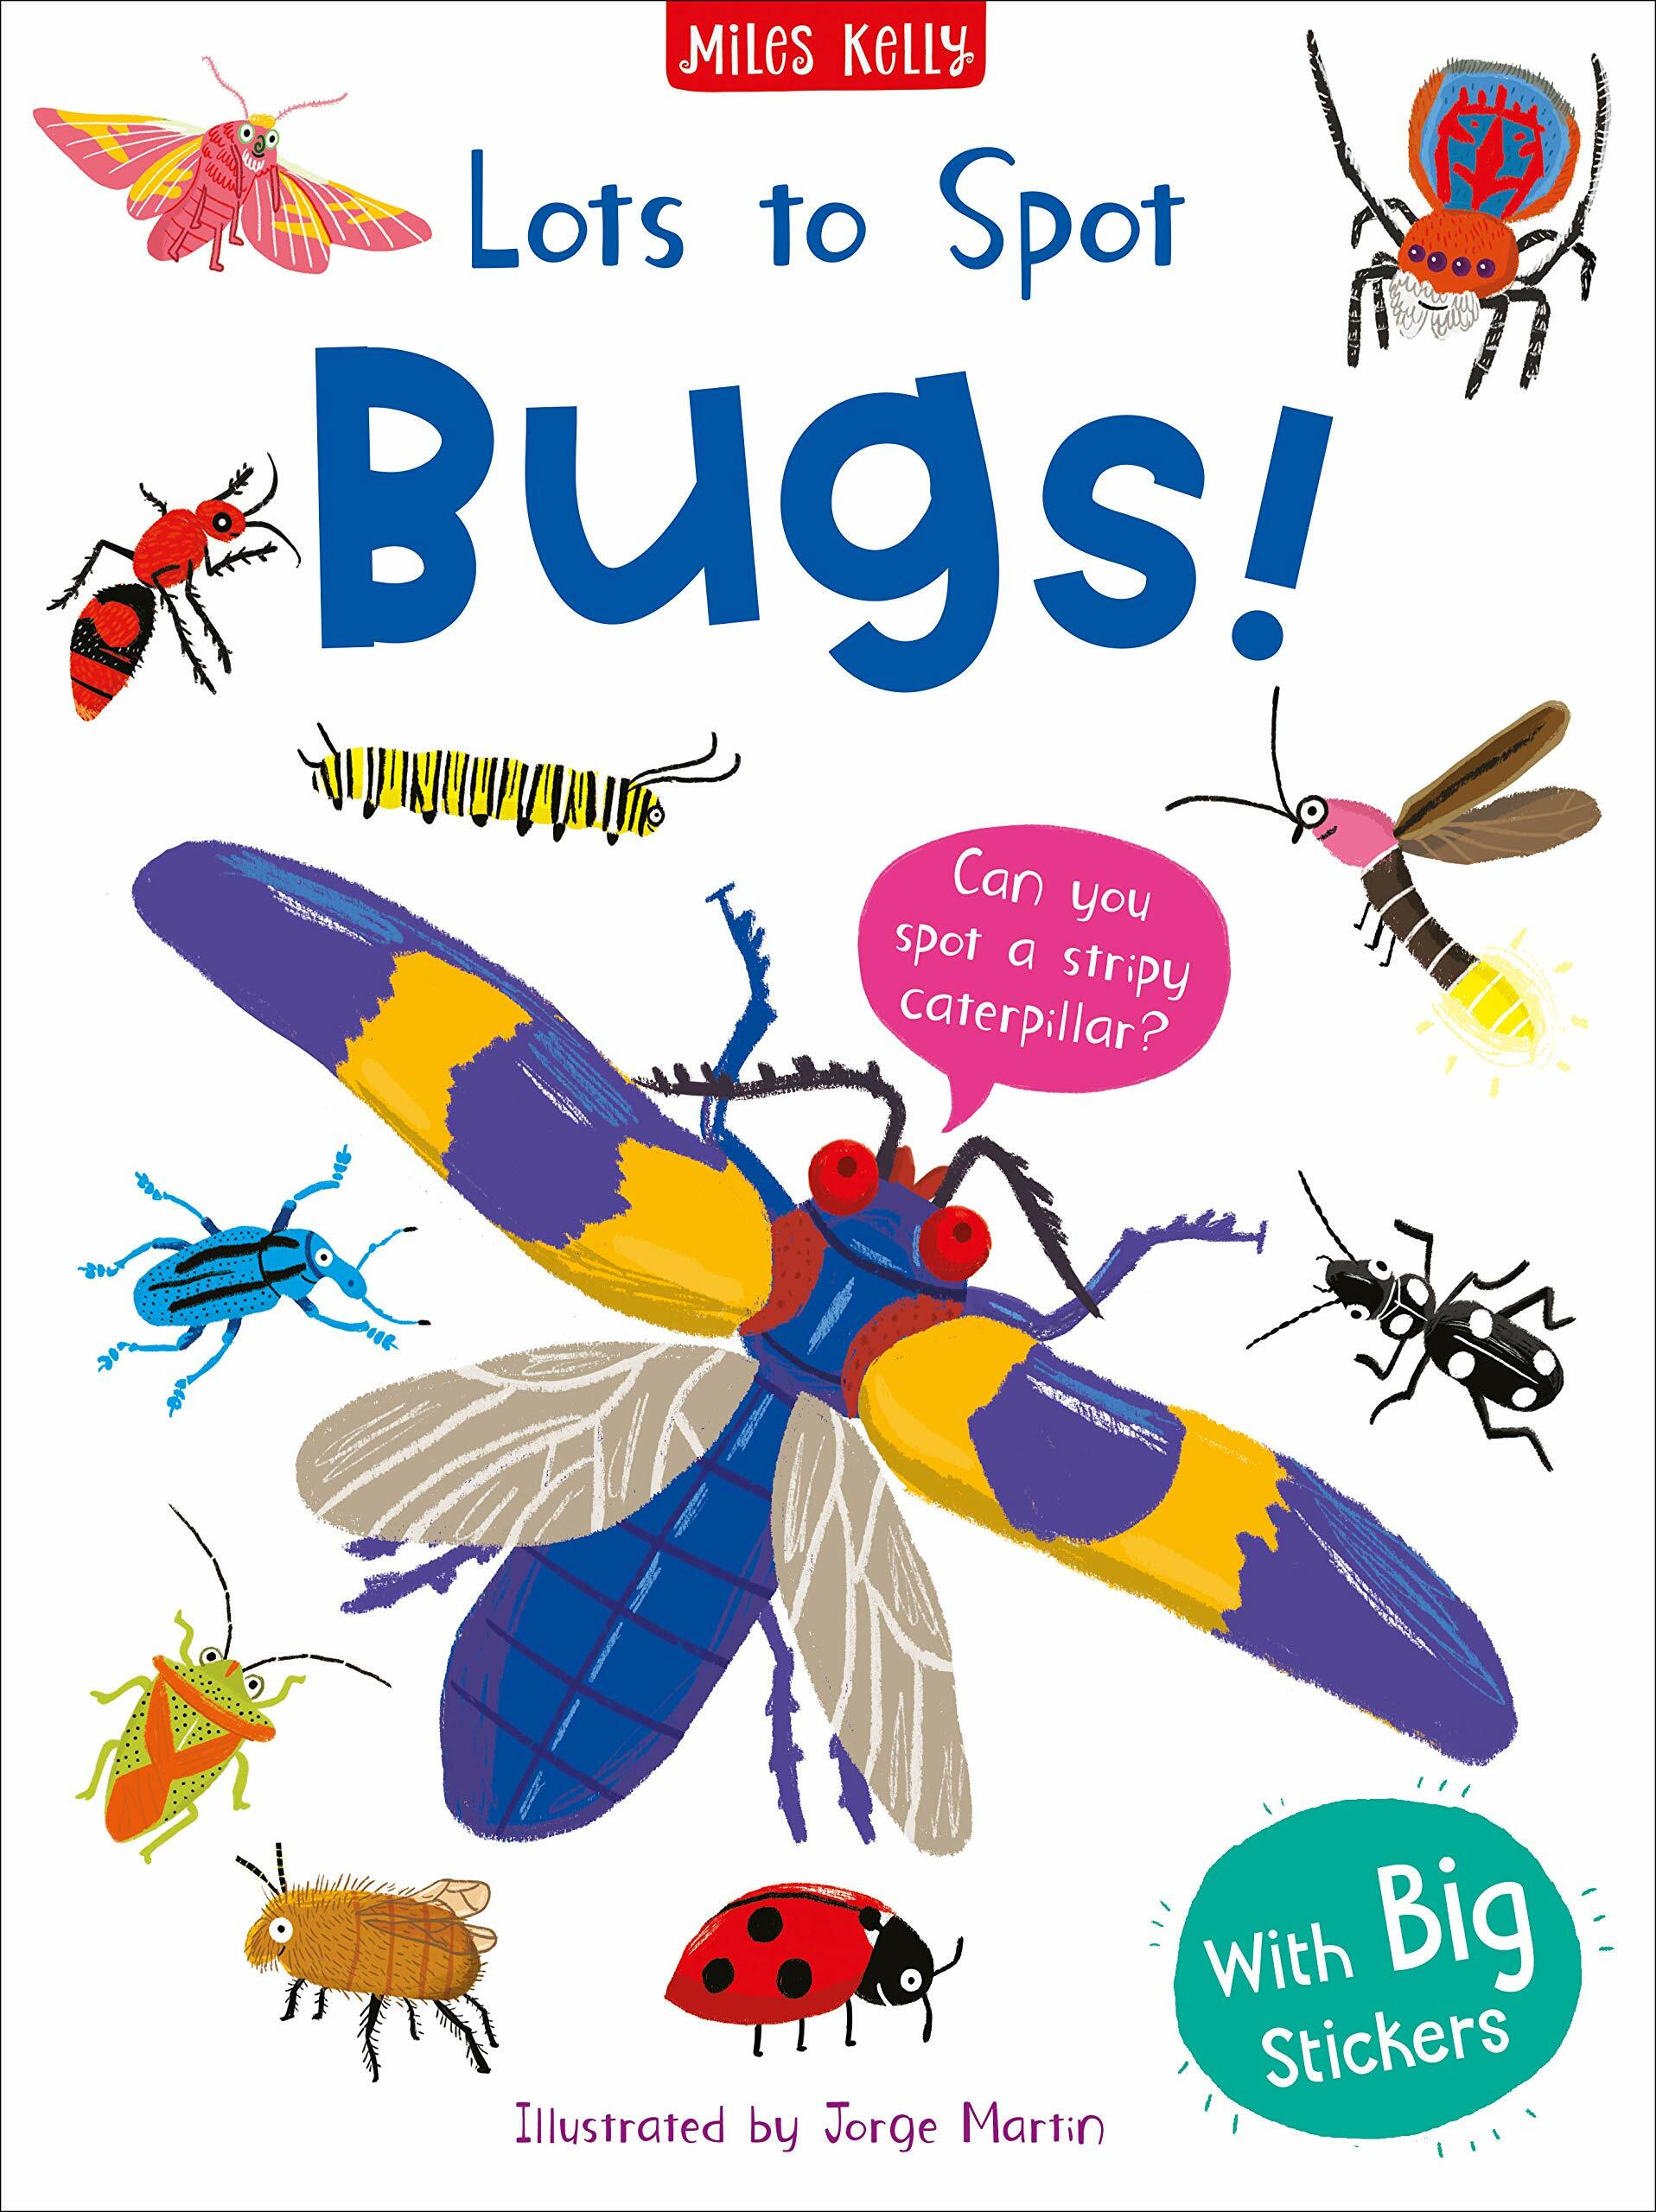 Lots to Spot Sticker Book: Bugs! (Stickers)